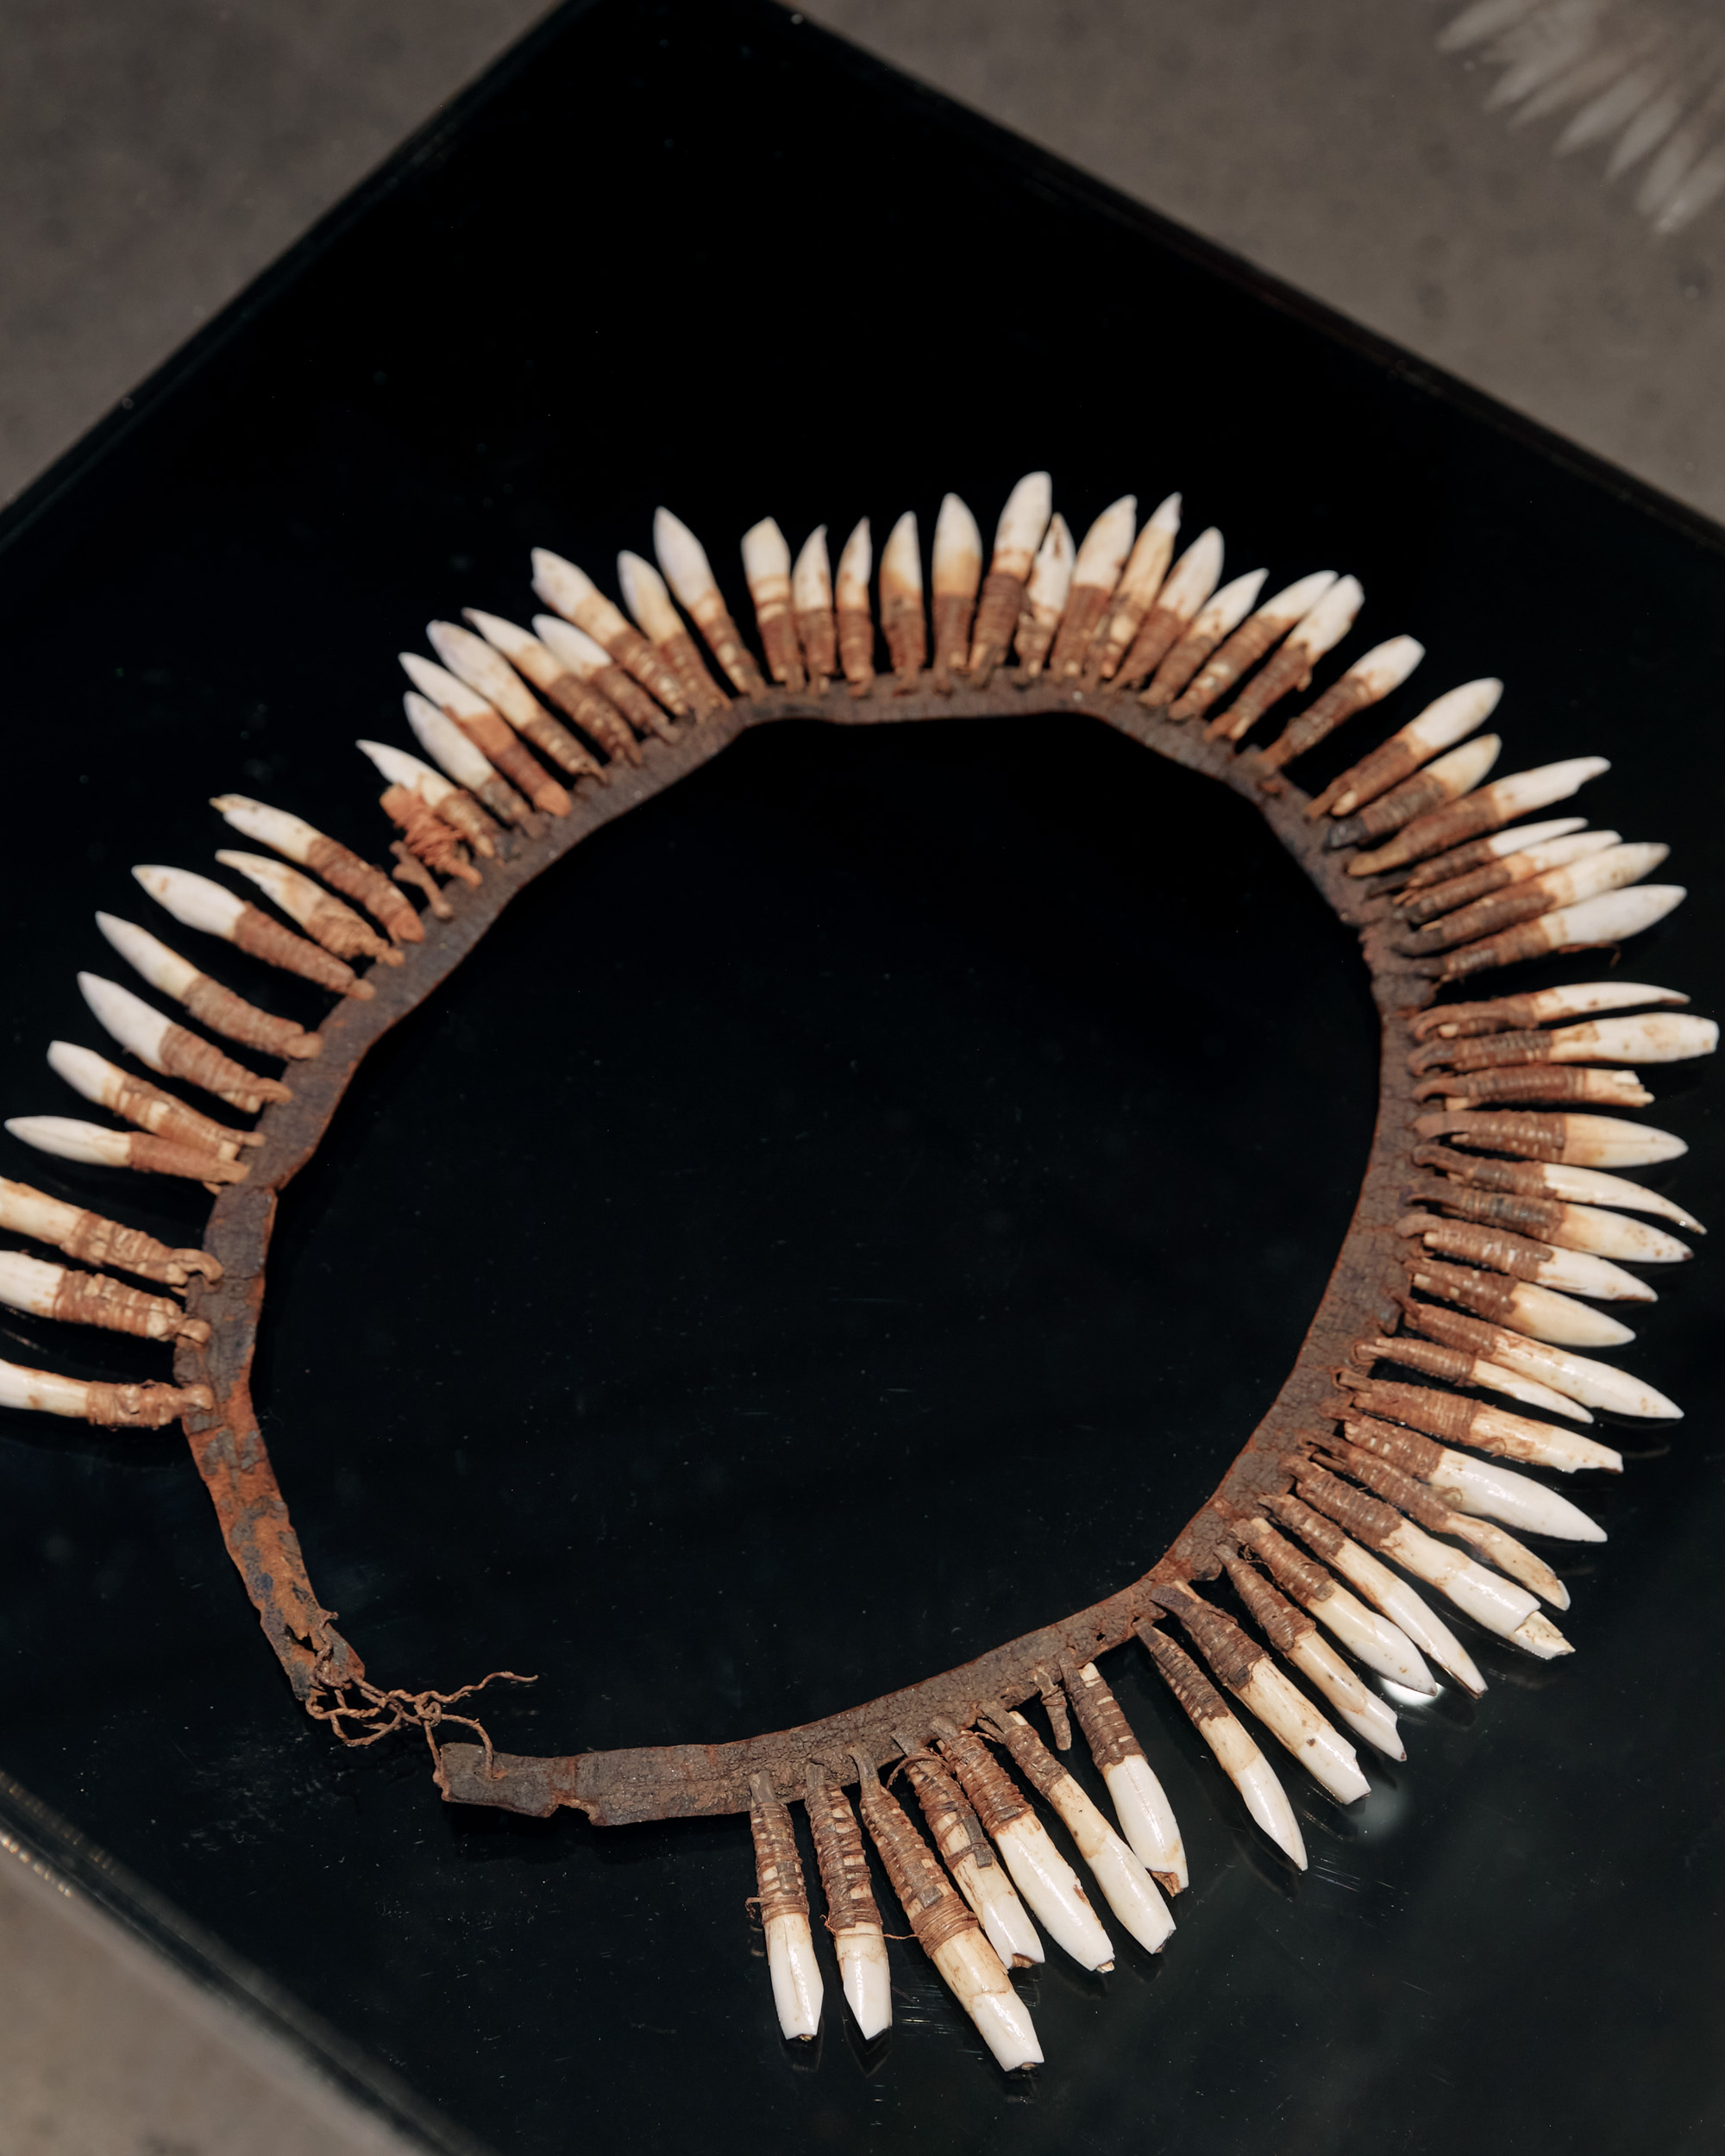 A kangaroo teeth necklace laid out for view in a gallery space